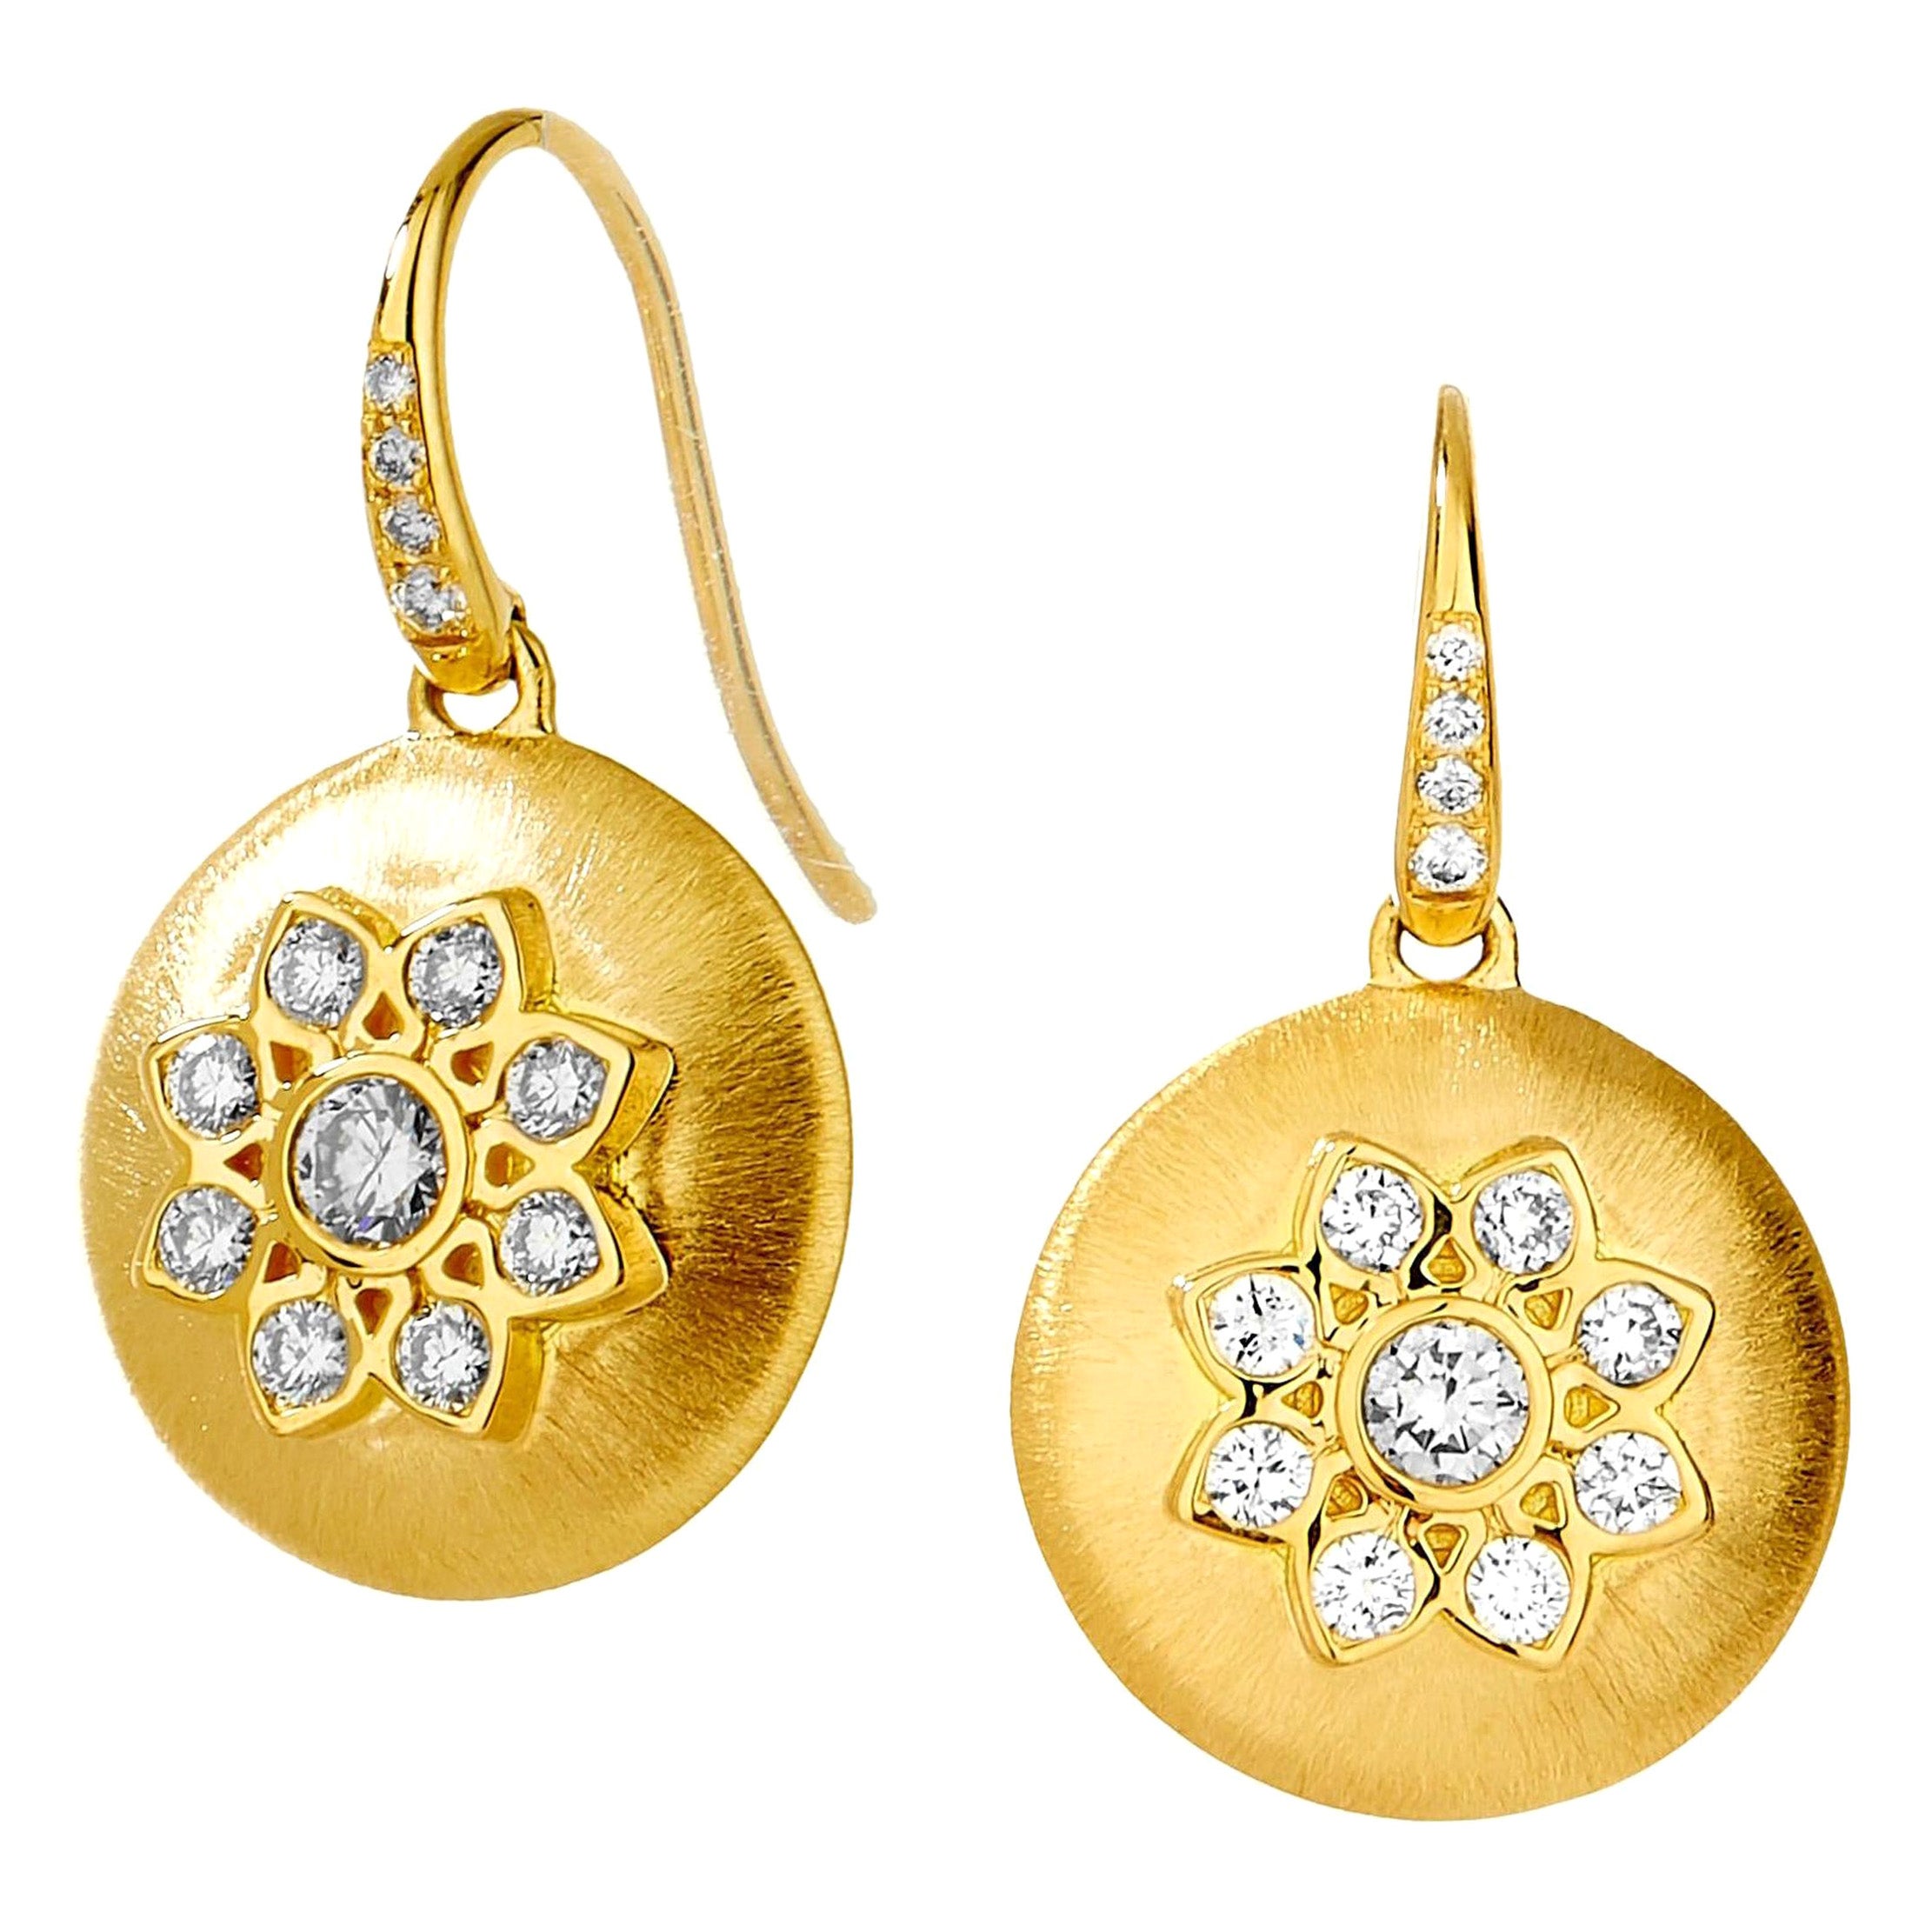 Syna Yellow Gold Flower Earrings with Diamonds